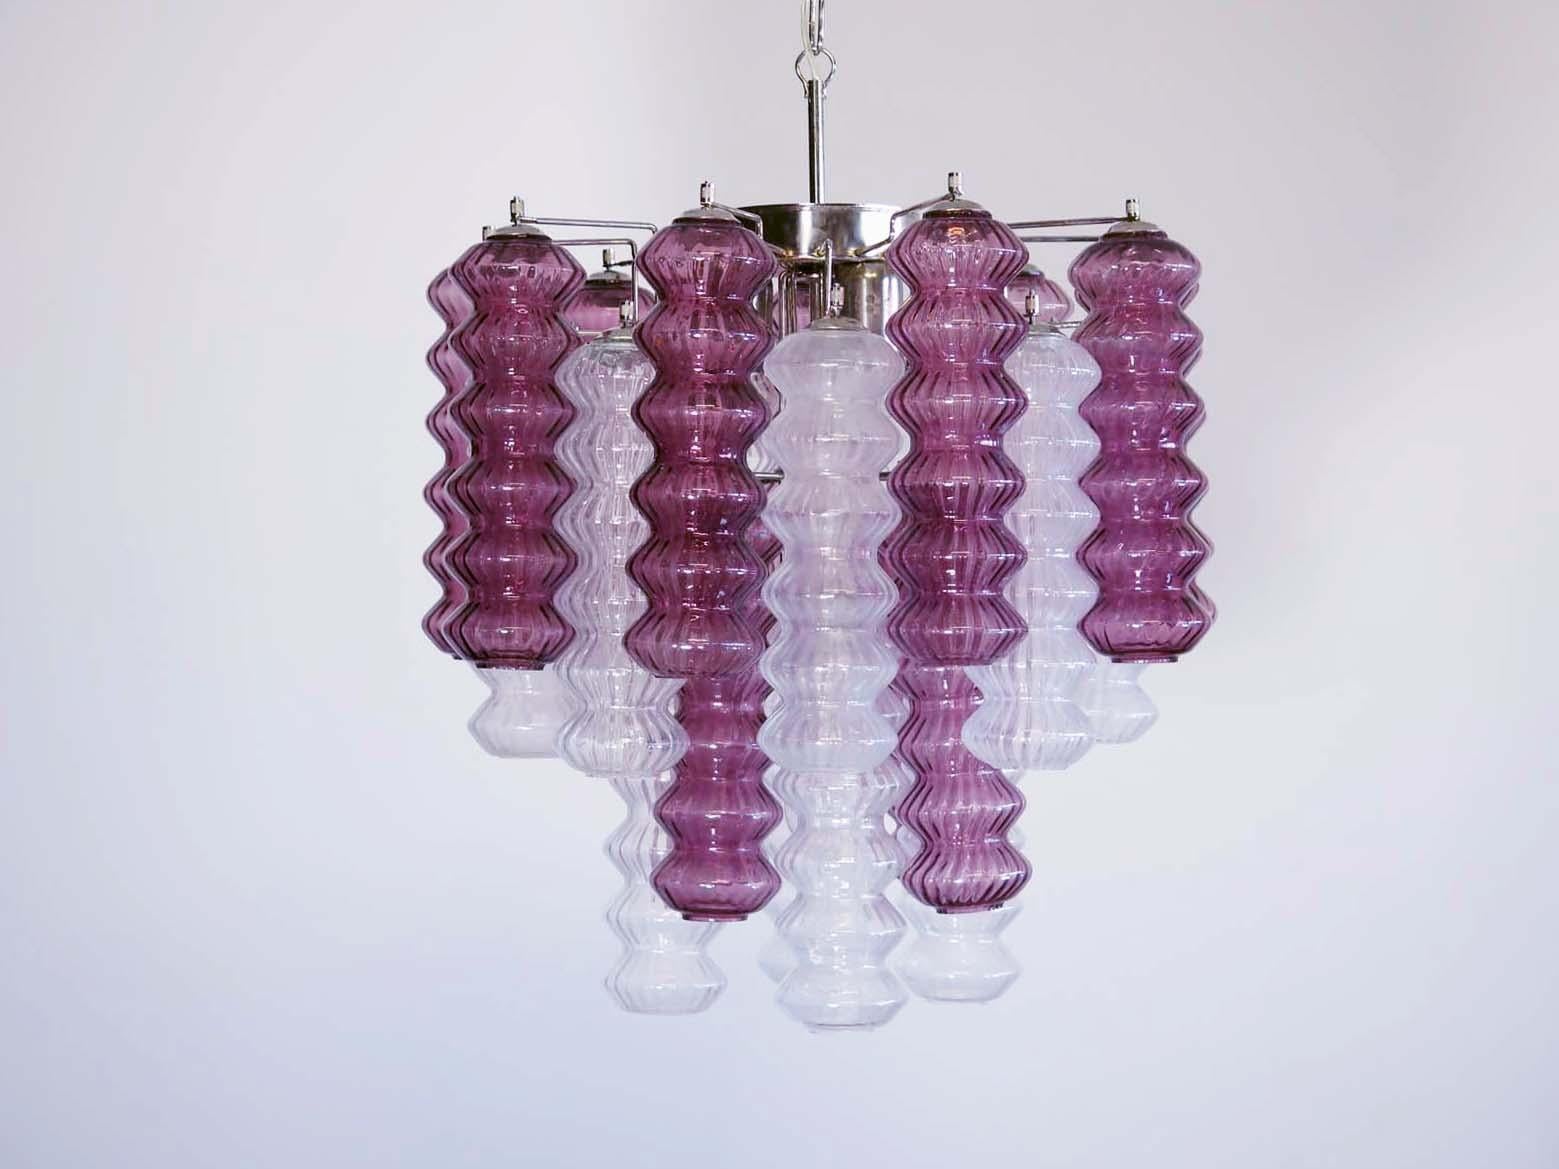 Rare Top Quality Murano Vintage Chandelier, Transparent and Purple Glass 7